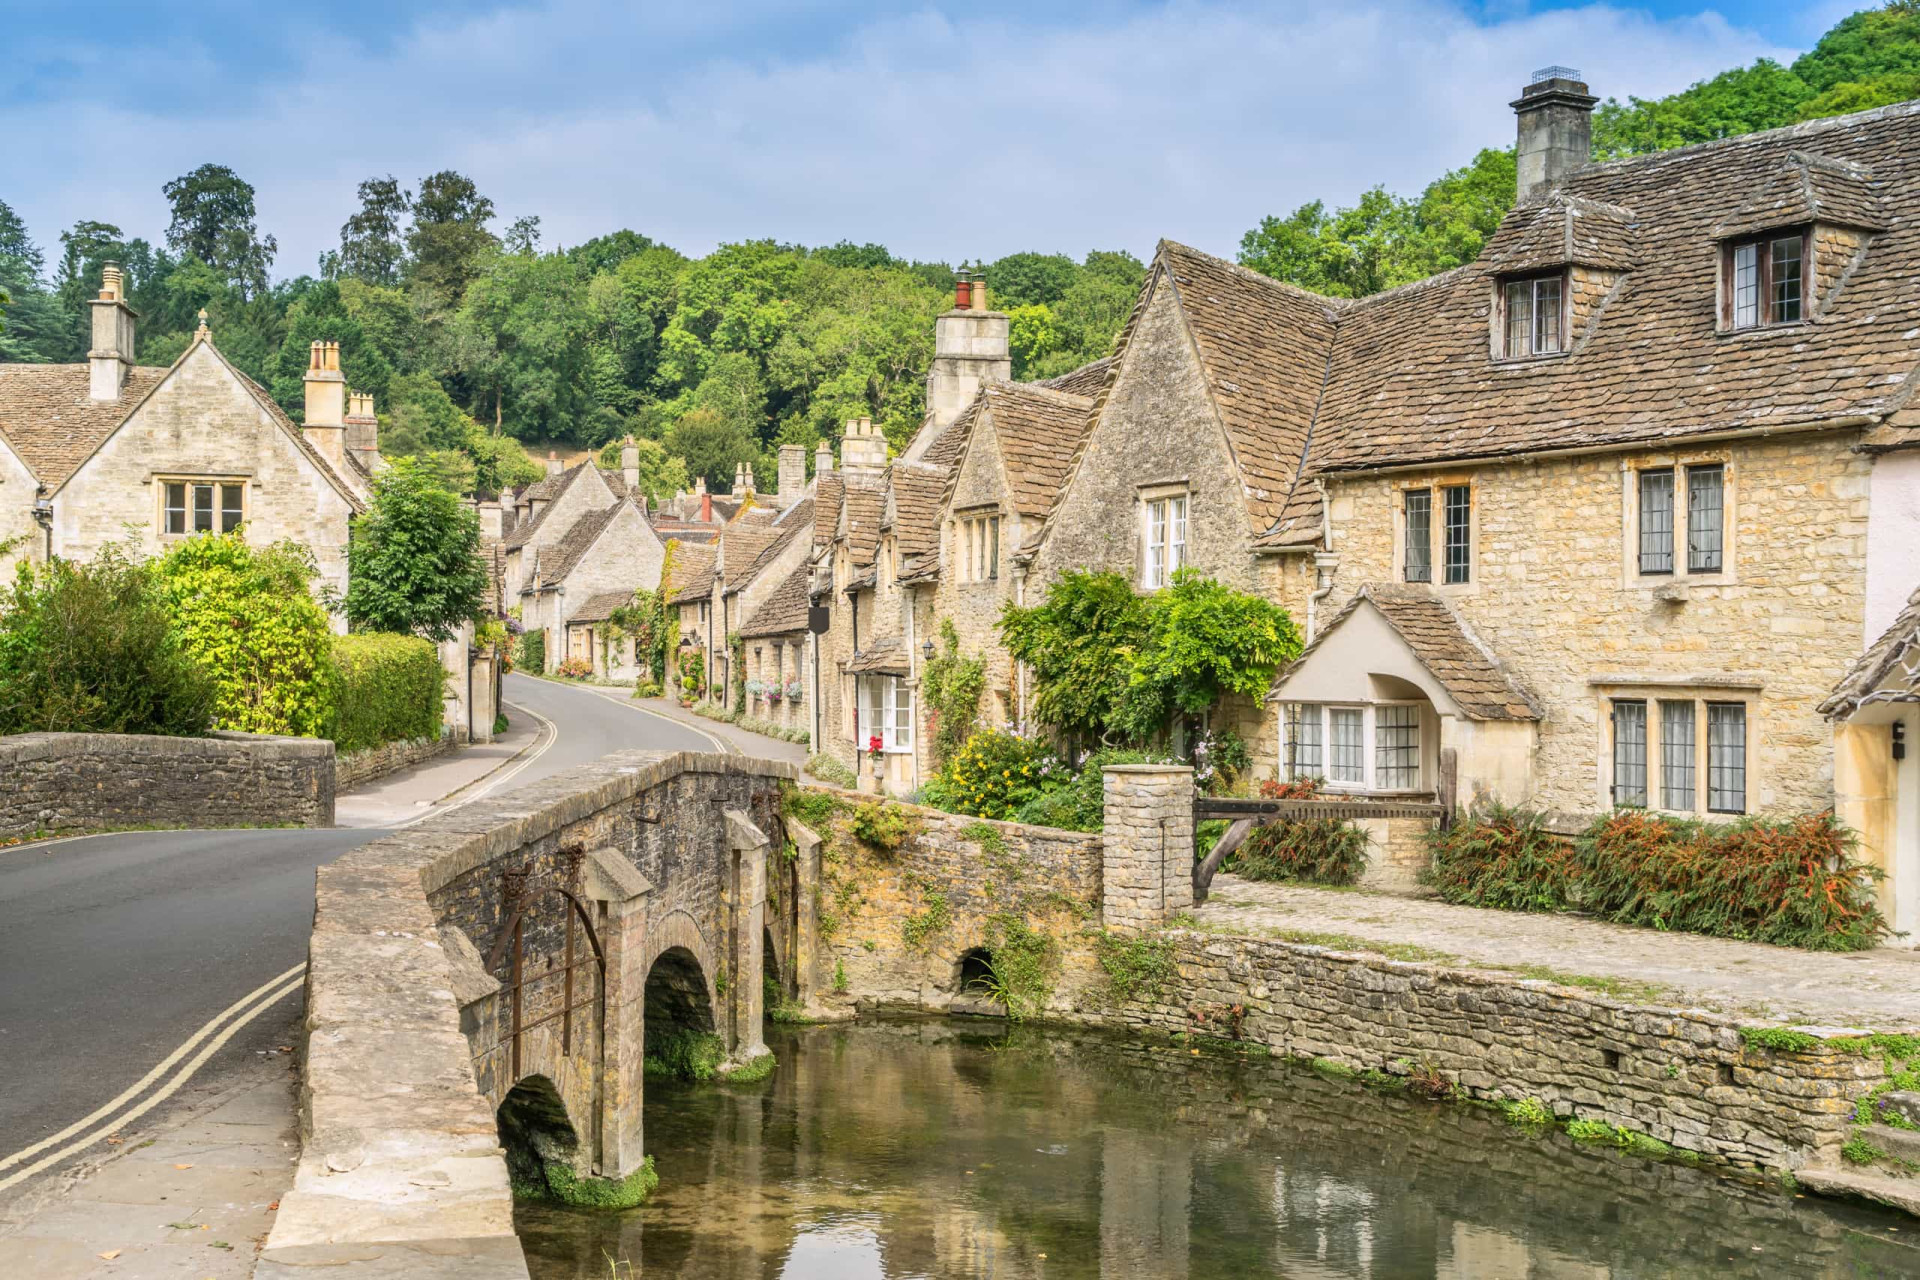 <p>Castle Combe in Wiltshire is repeatedly voted one of the best towns in the UK for both its looks and community. It is located in the Cotswolds and is known for its signature sandy brickwork and a working medieval clock.</p>